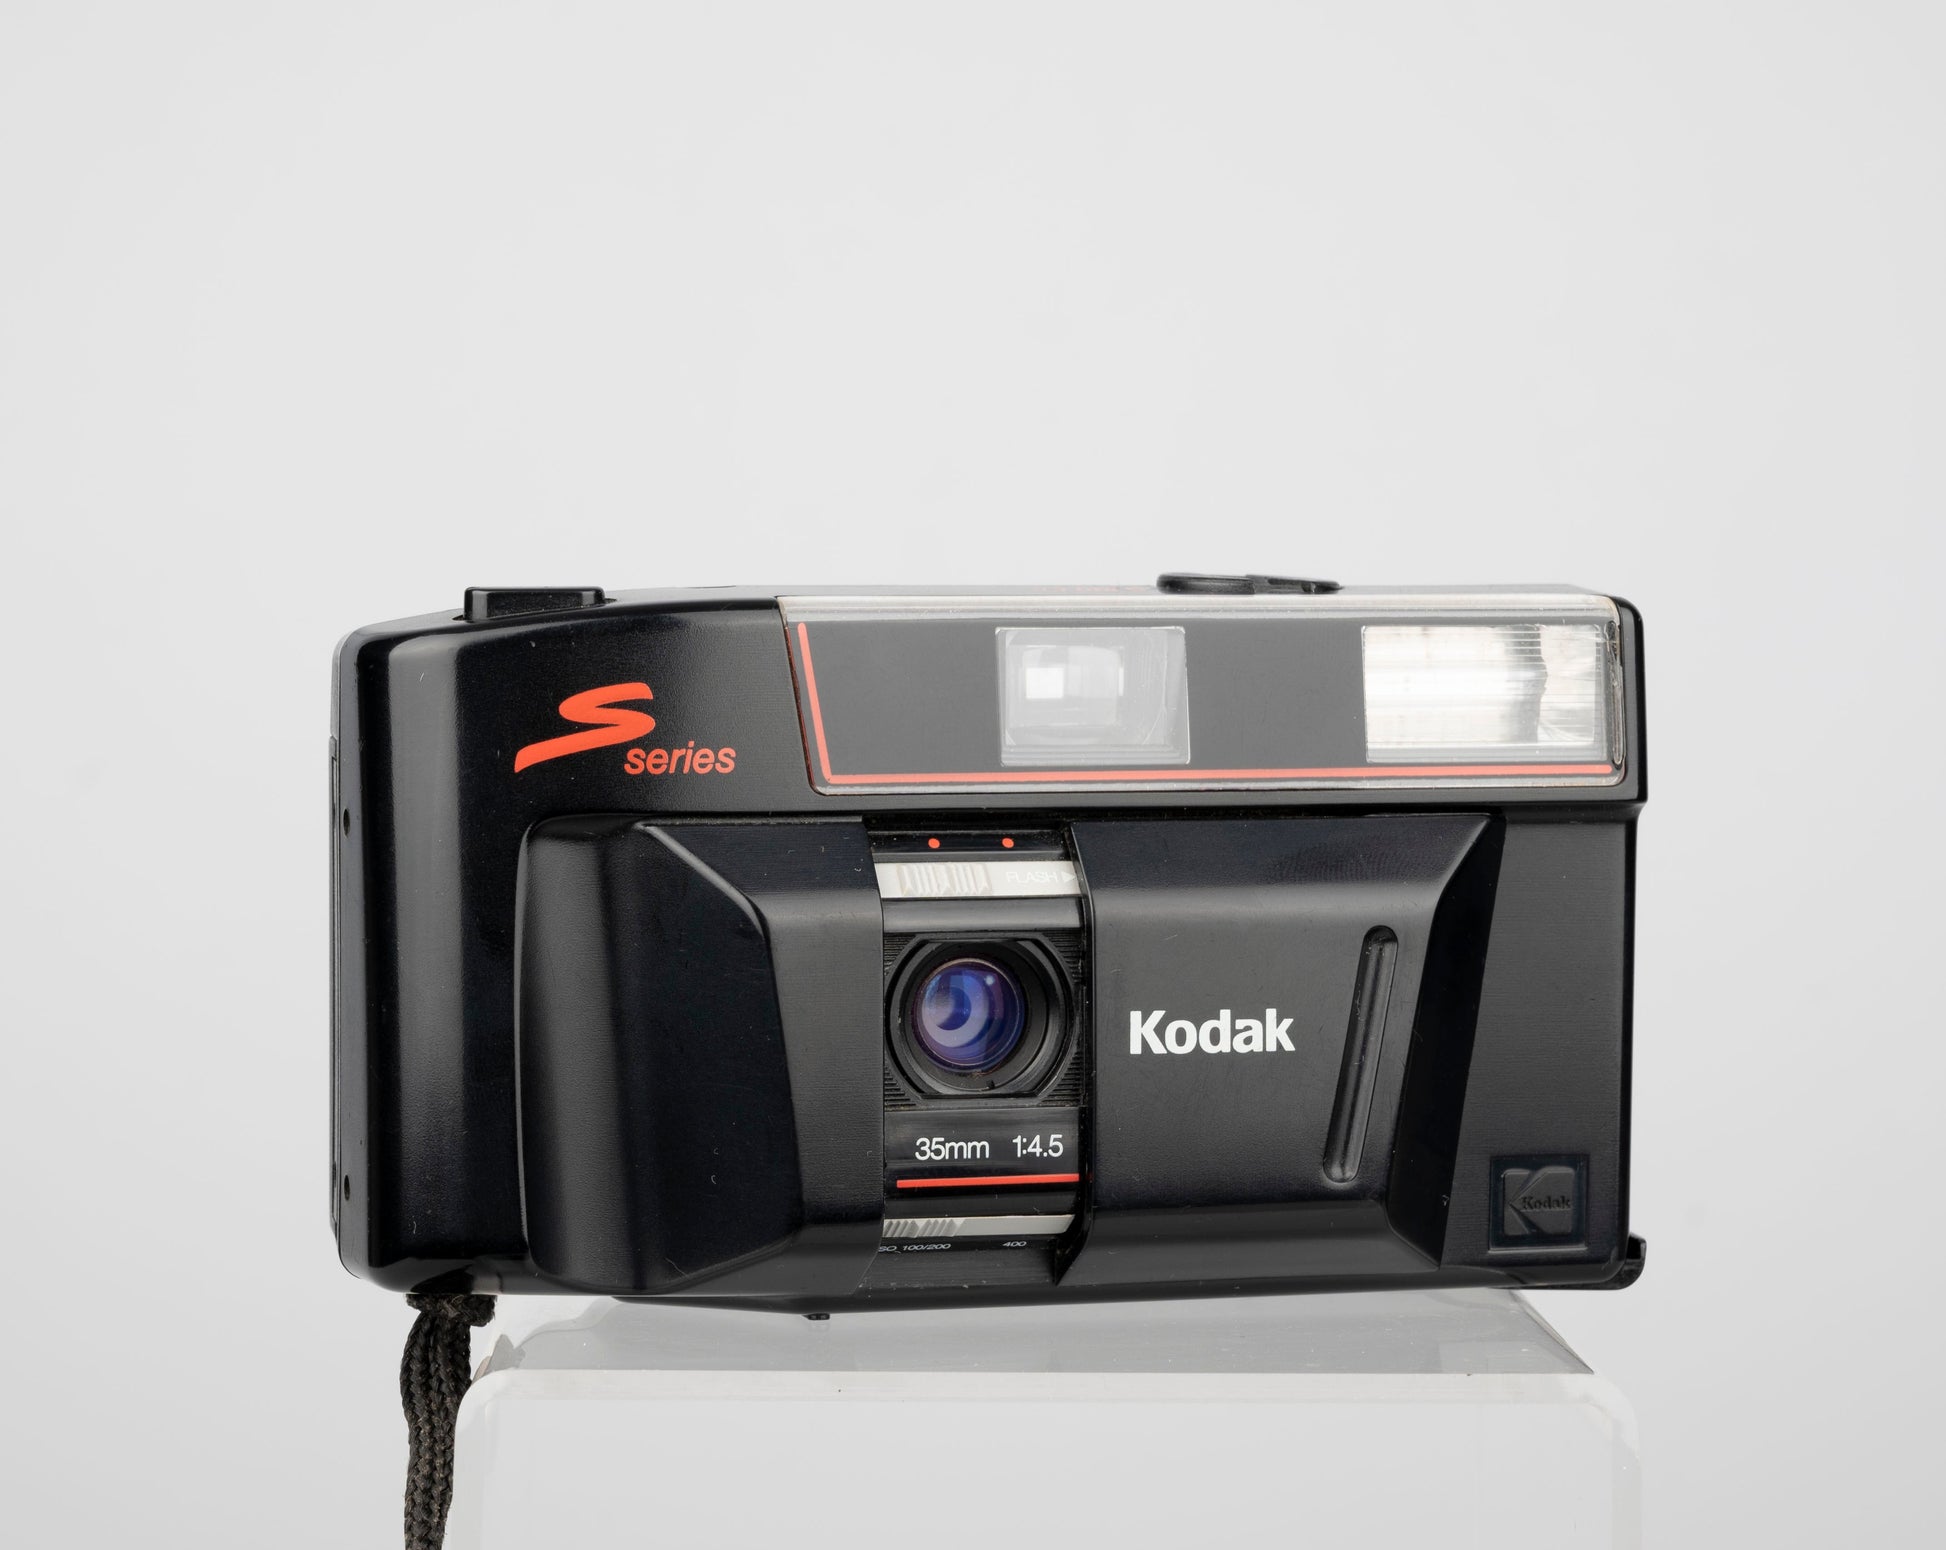 The Kodak S-Series S100EF is a very simple but nicely styled snapshot 35mm camera from the late 1980s